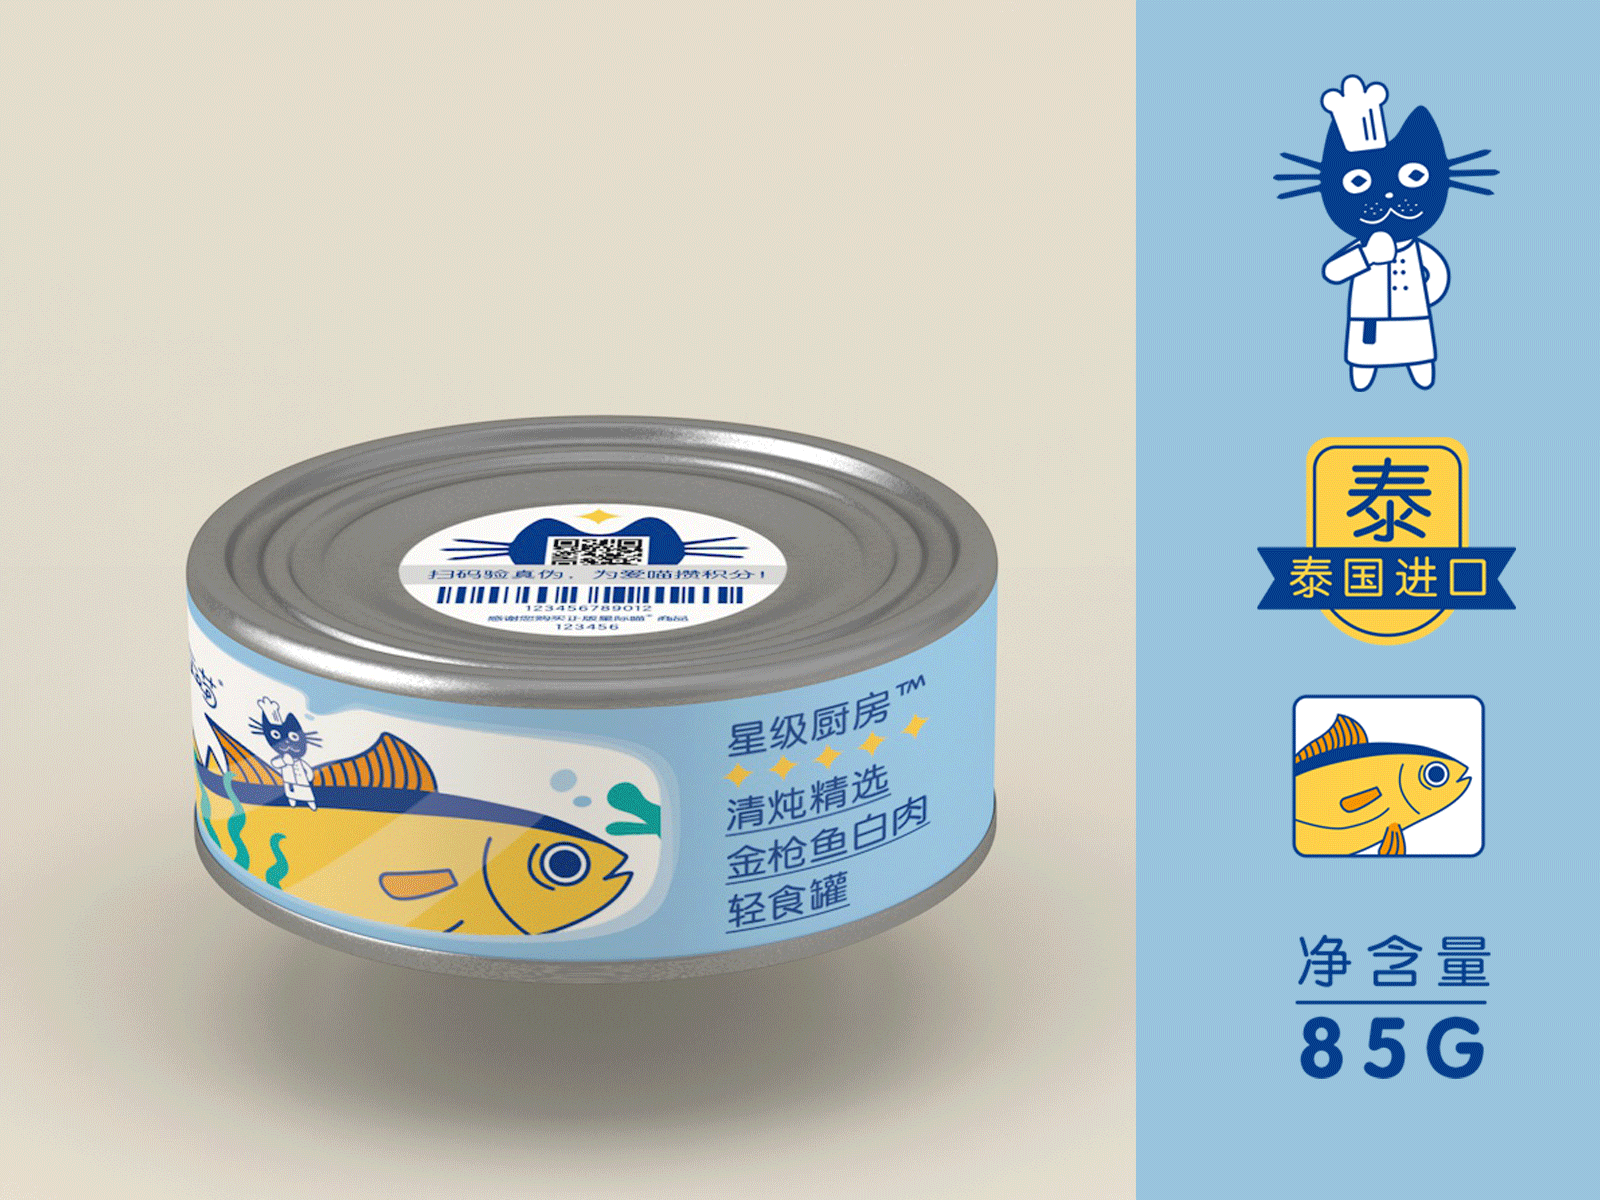 CANNED FOOD DESIGN